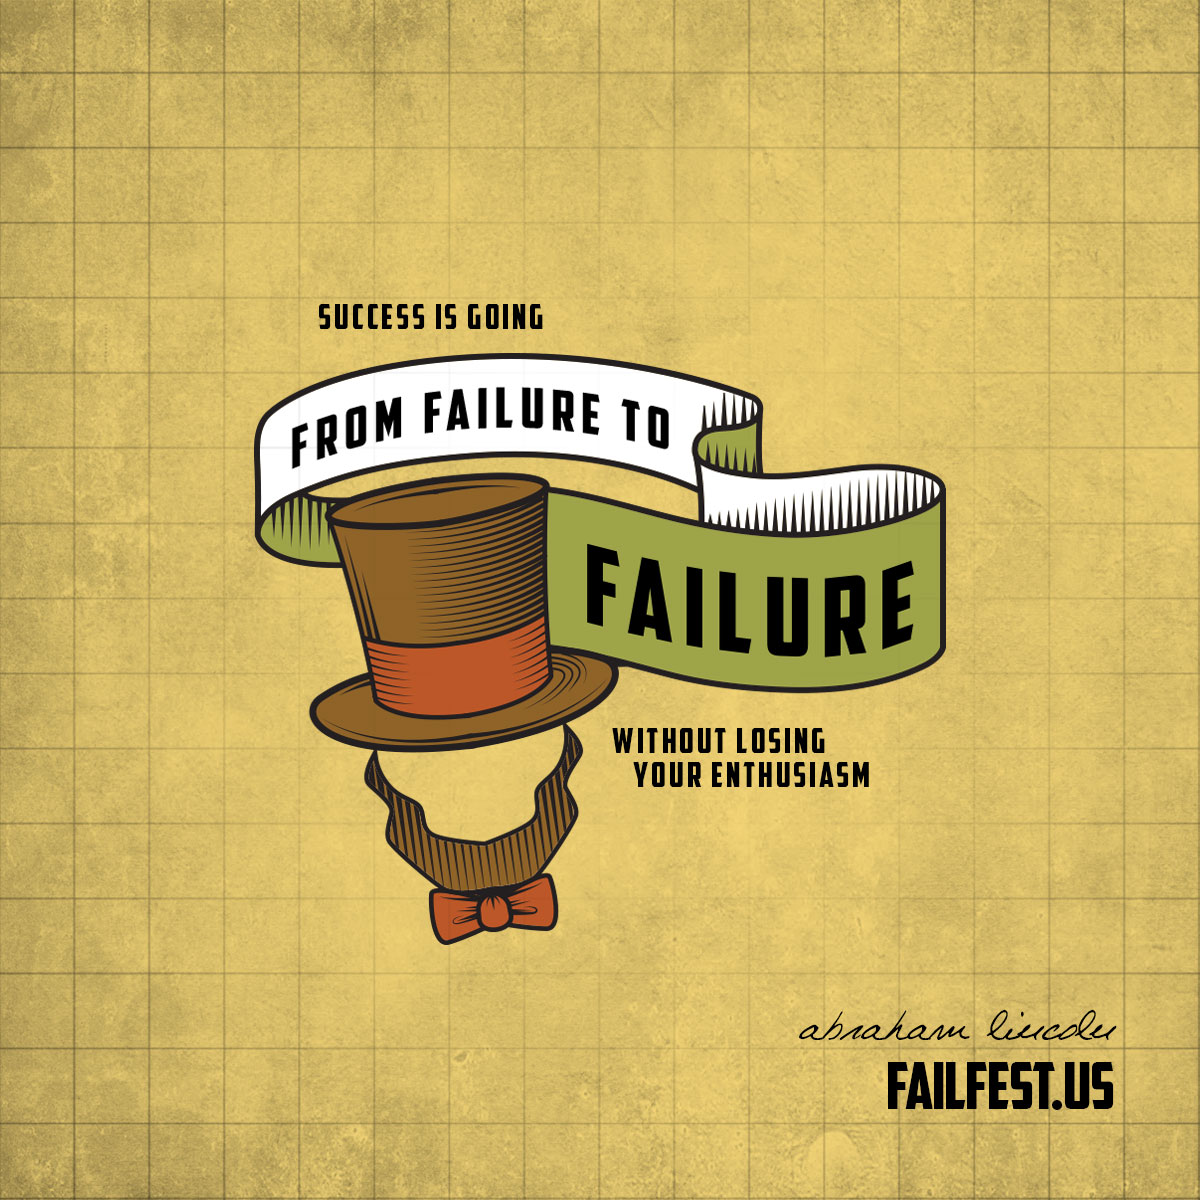 Failure is only failure if you let be. Choose it as your path to success.